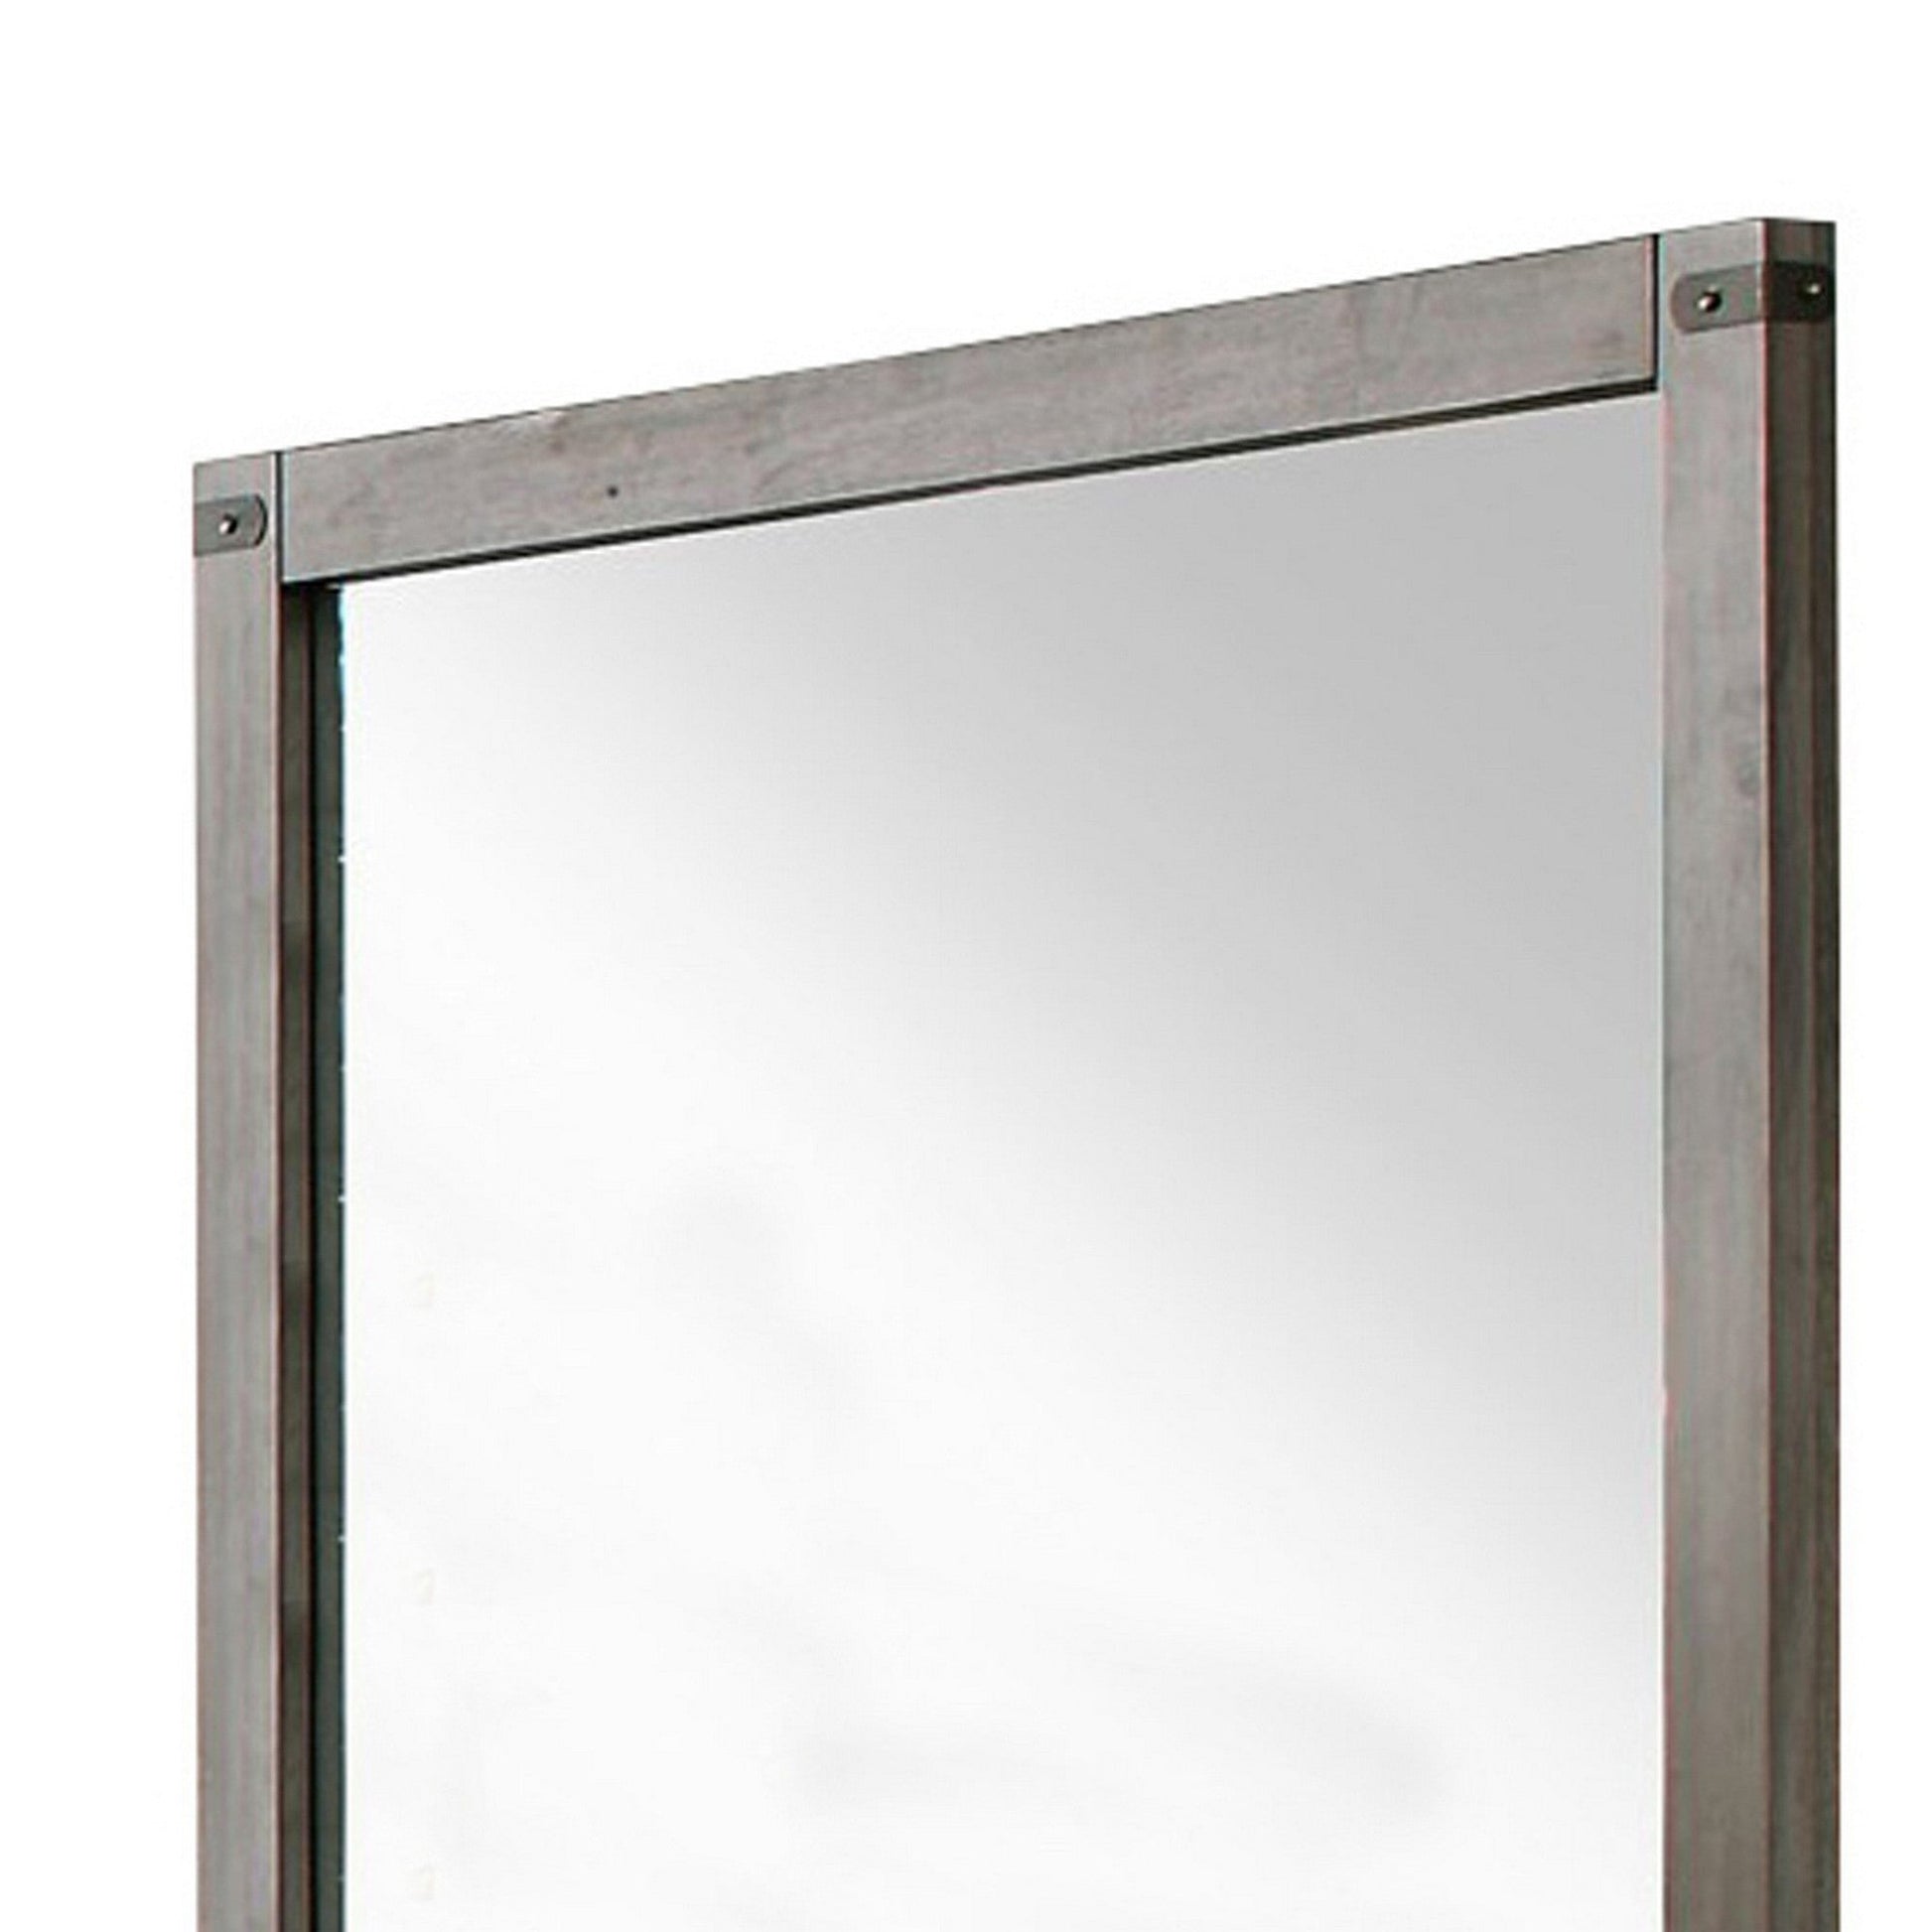 Benzara Brown Industrial Style Wooden Frame Mirror With Metal Brackets and Rivets